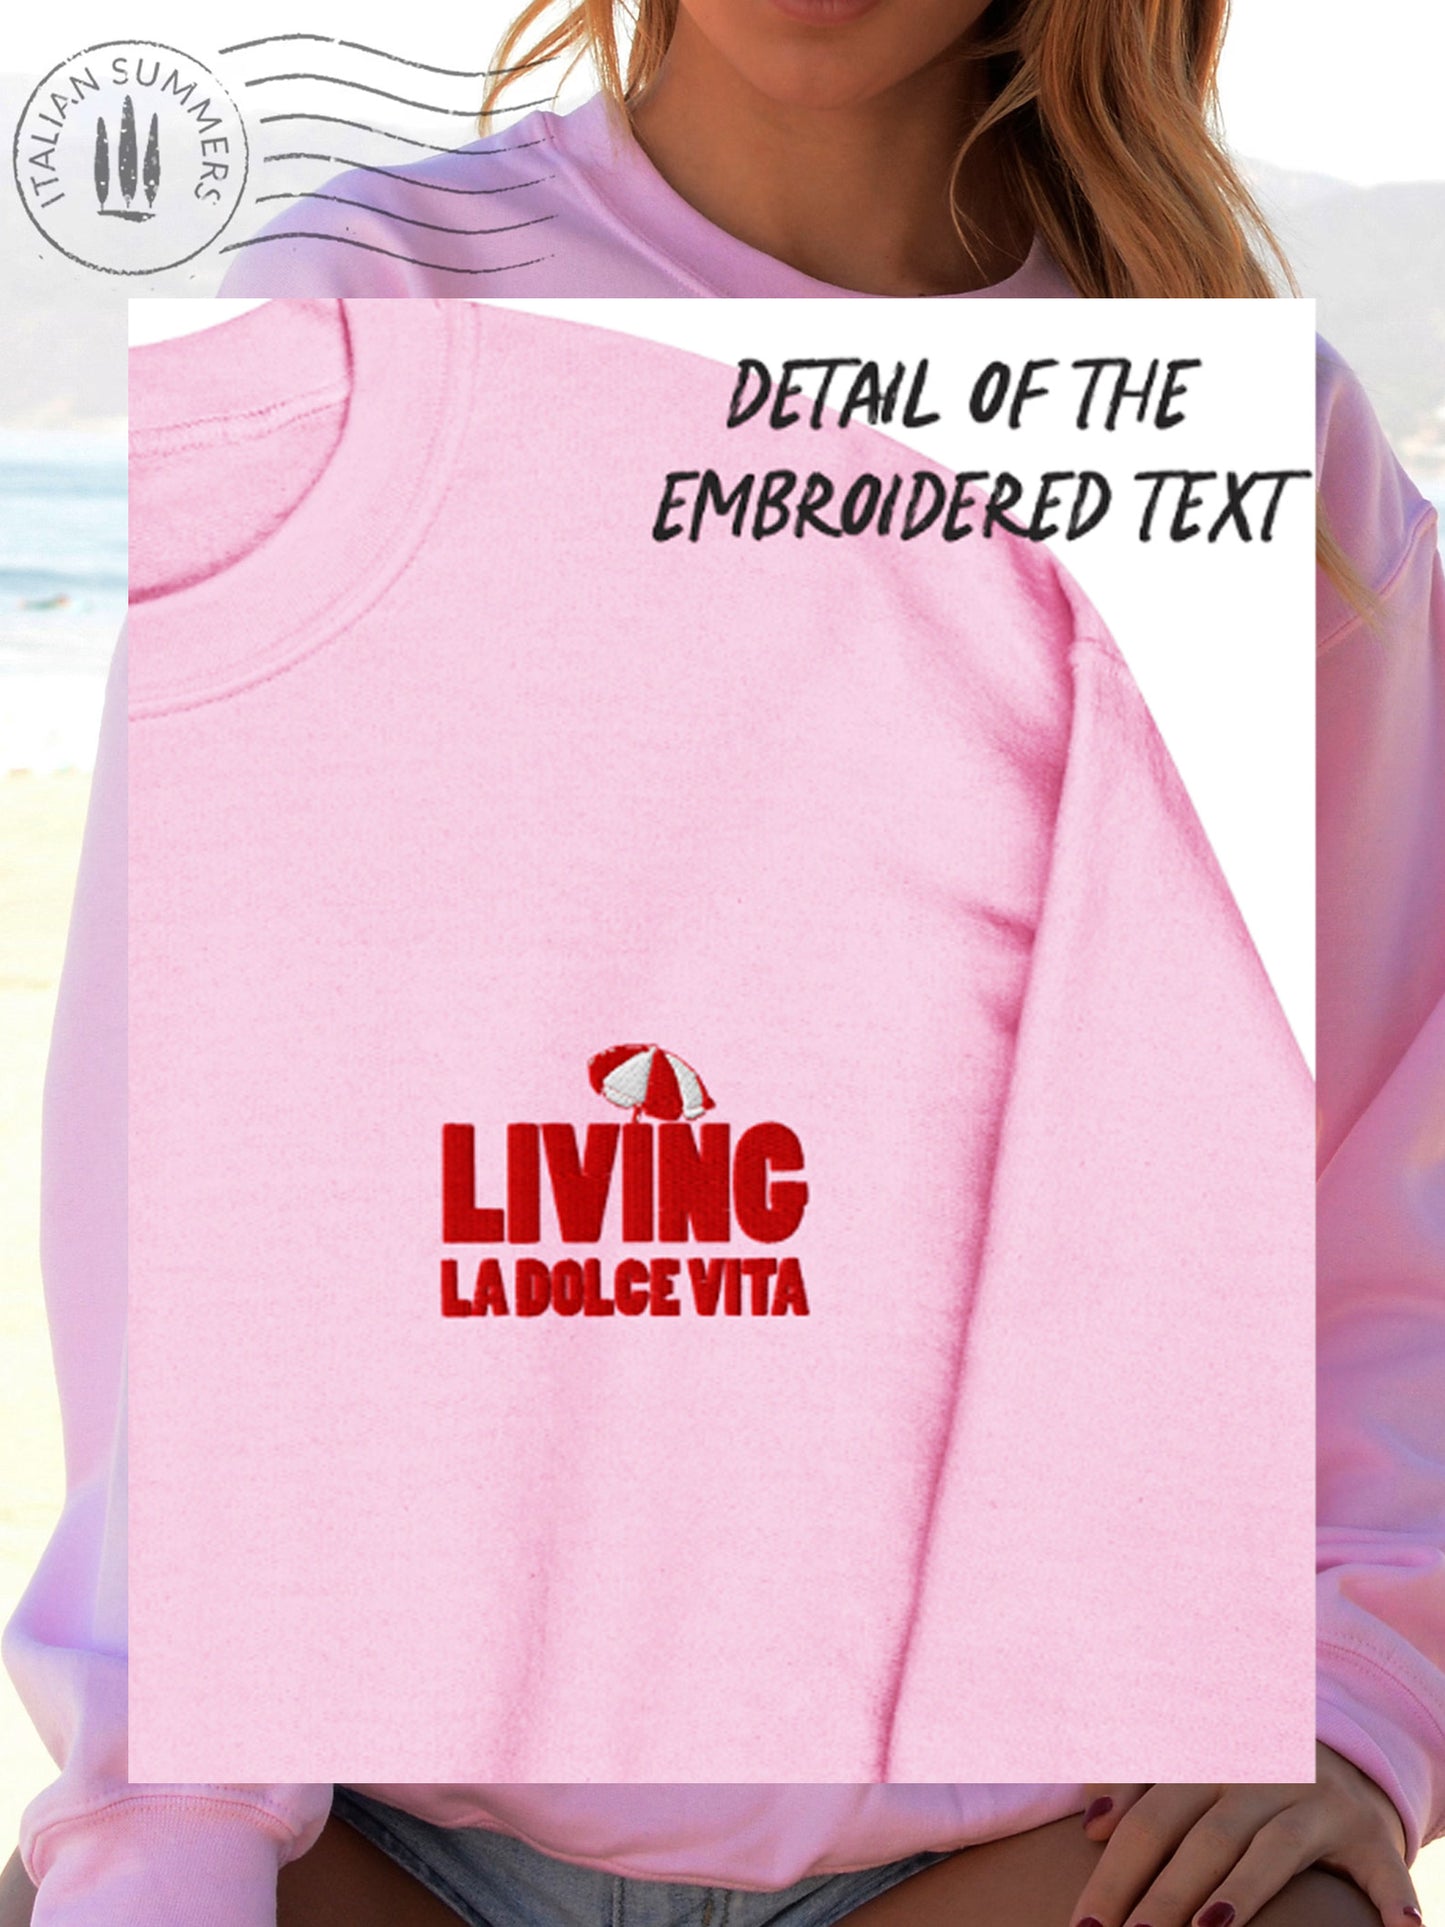 A n Italy-inspired, soft and comfortable made to order  Hoodie . Pink cotton blend with an embroidered red decoration text  LIVING LA DOLCE VITA with a red and white beach umbrella on top.  Large print of the same text on the back. Front pocket